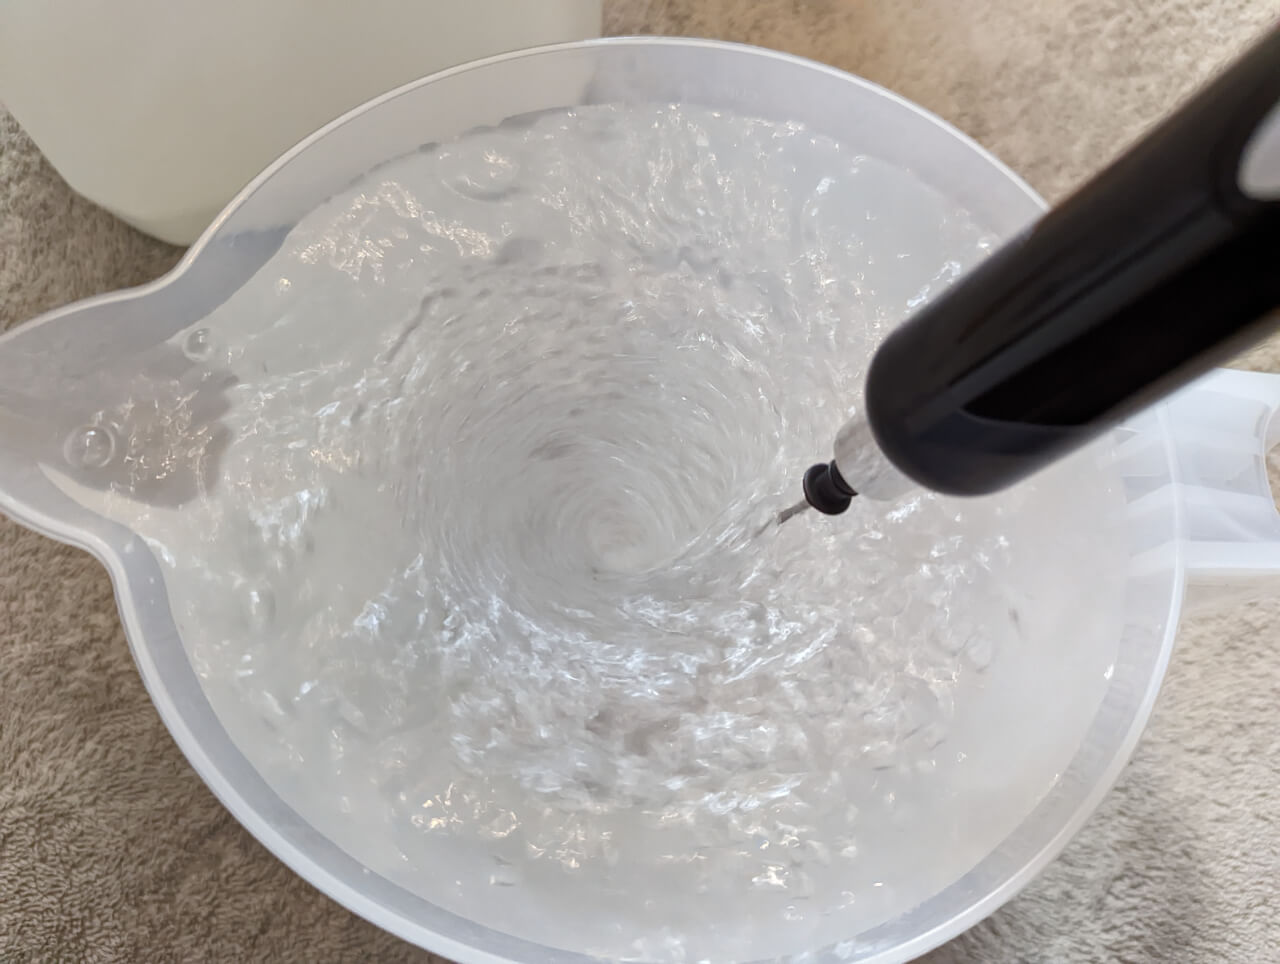 Remineralized water being mixed in a jug